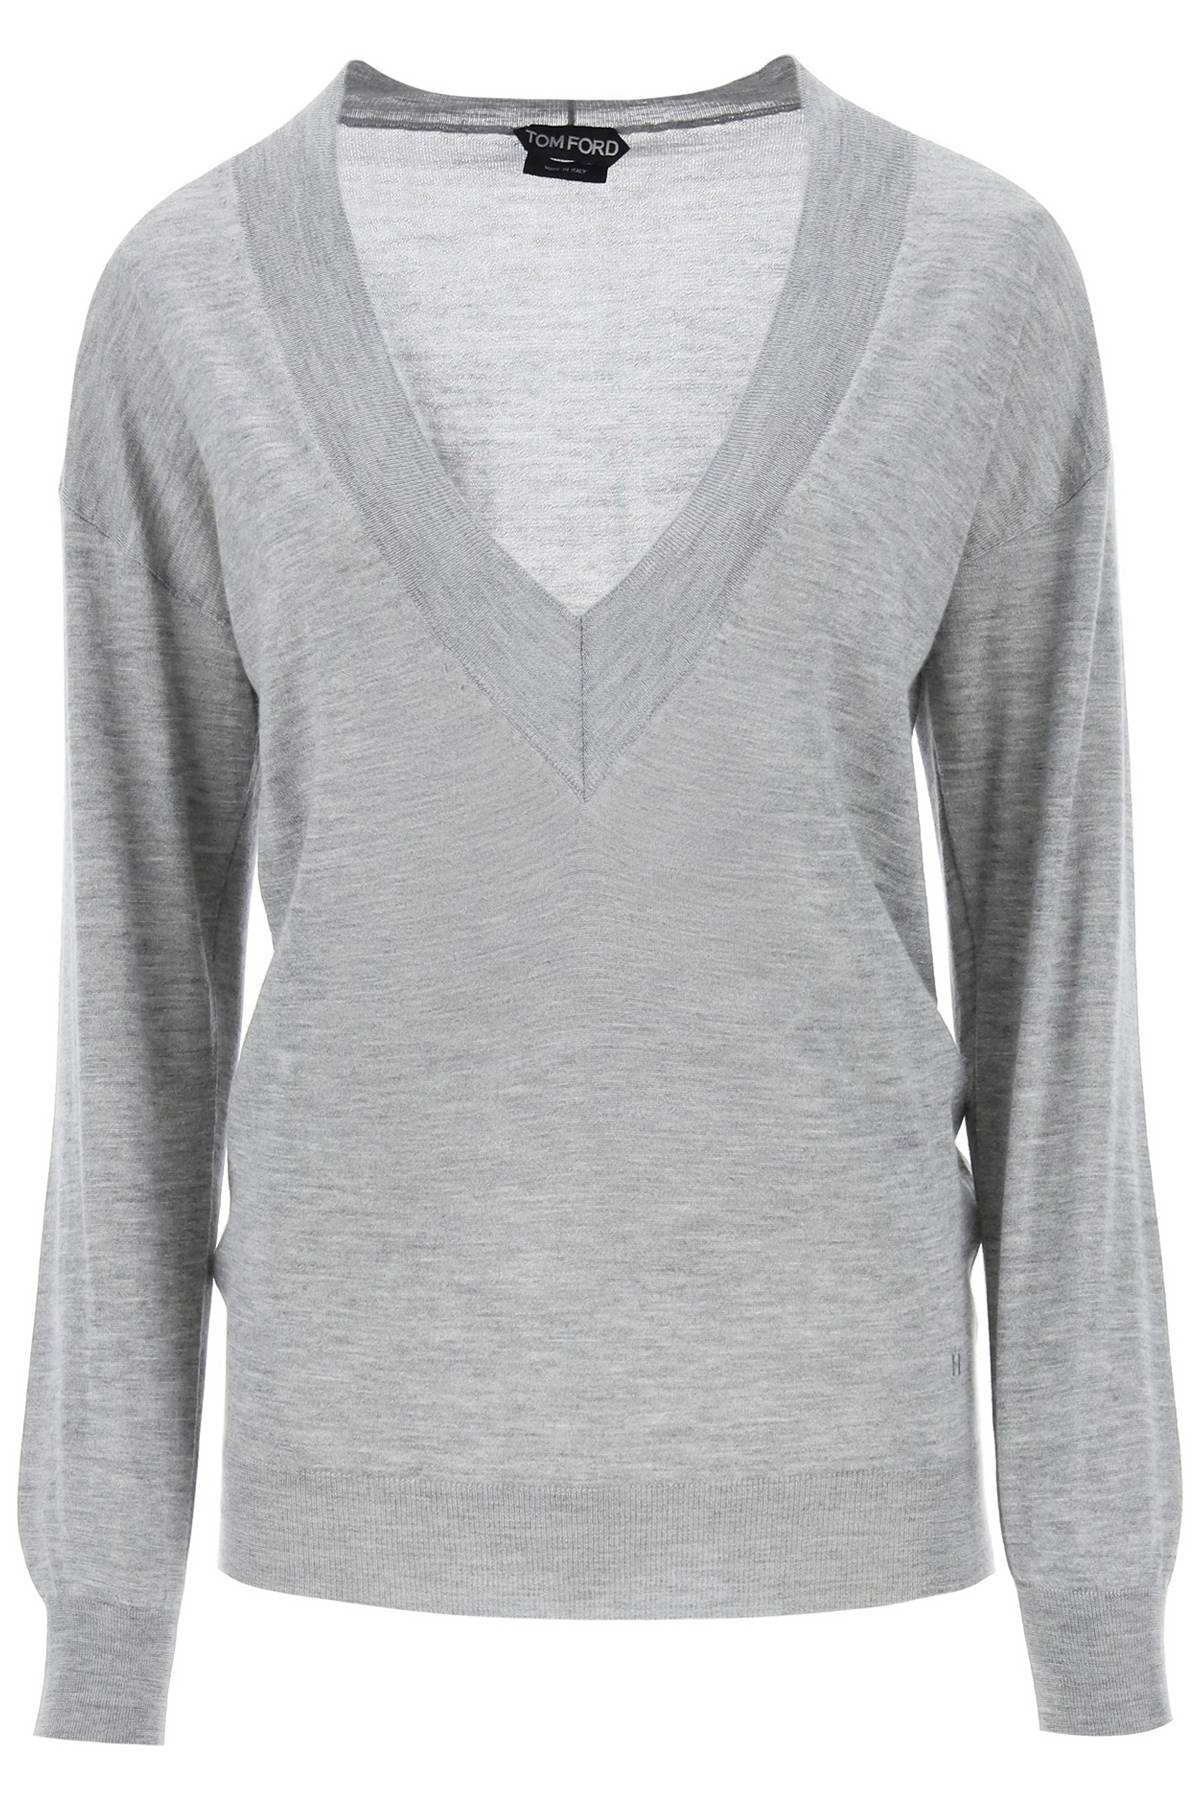 TOM FORD Premium Gray Cashmere and Silk Blend Sweater for Women - FW23